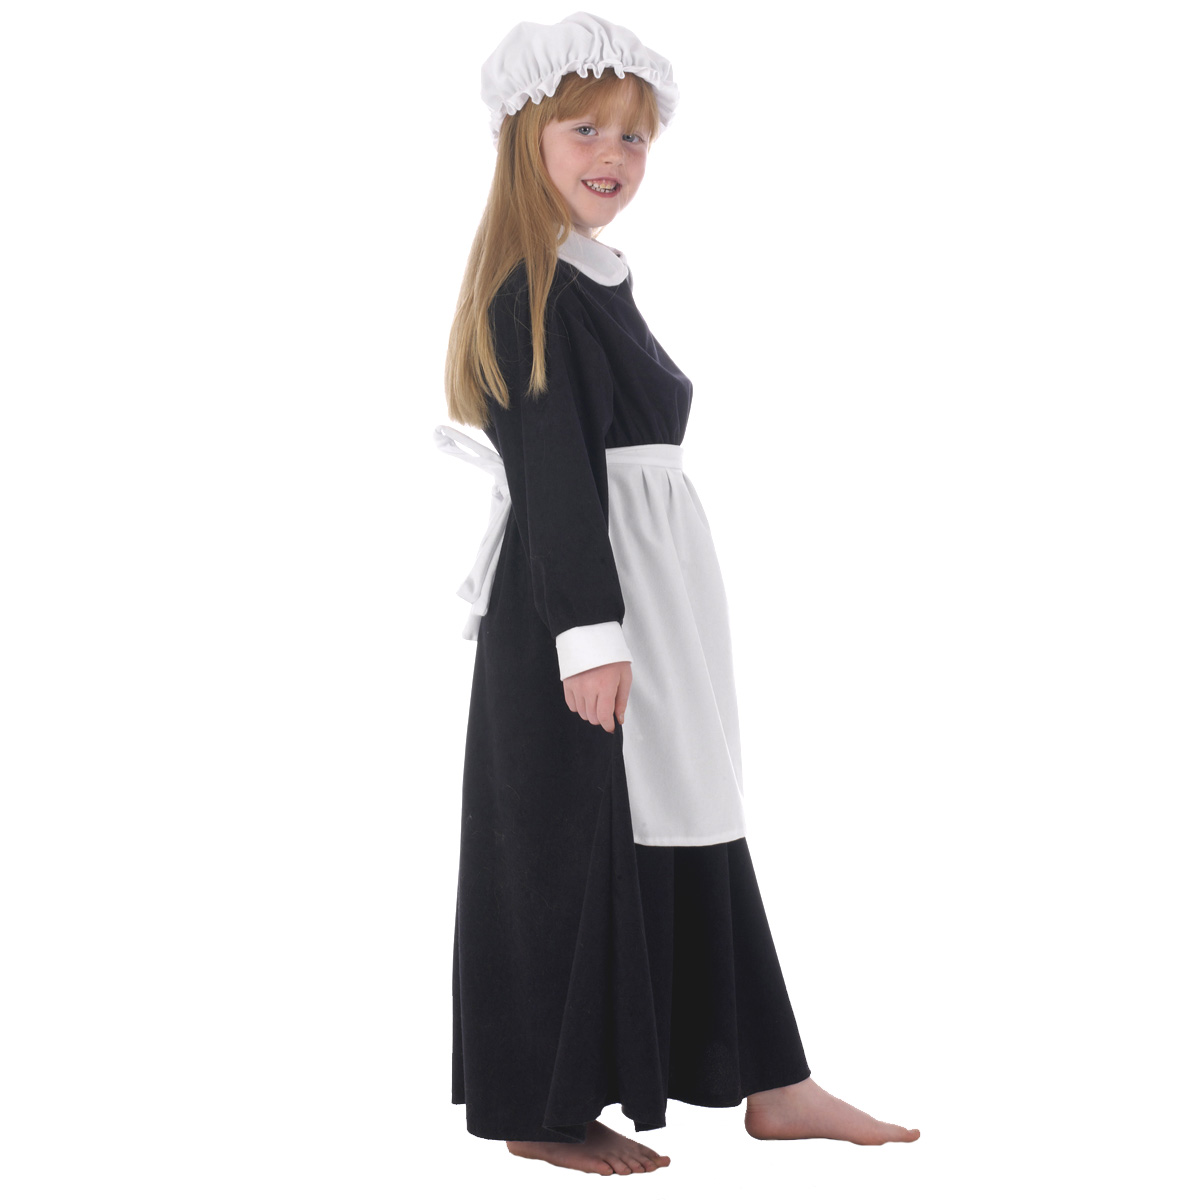 Childrens Girls Fancy Dress Victorian School Girl Costume Kids Childs Outfit New 